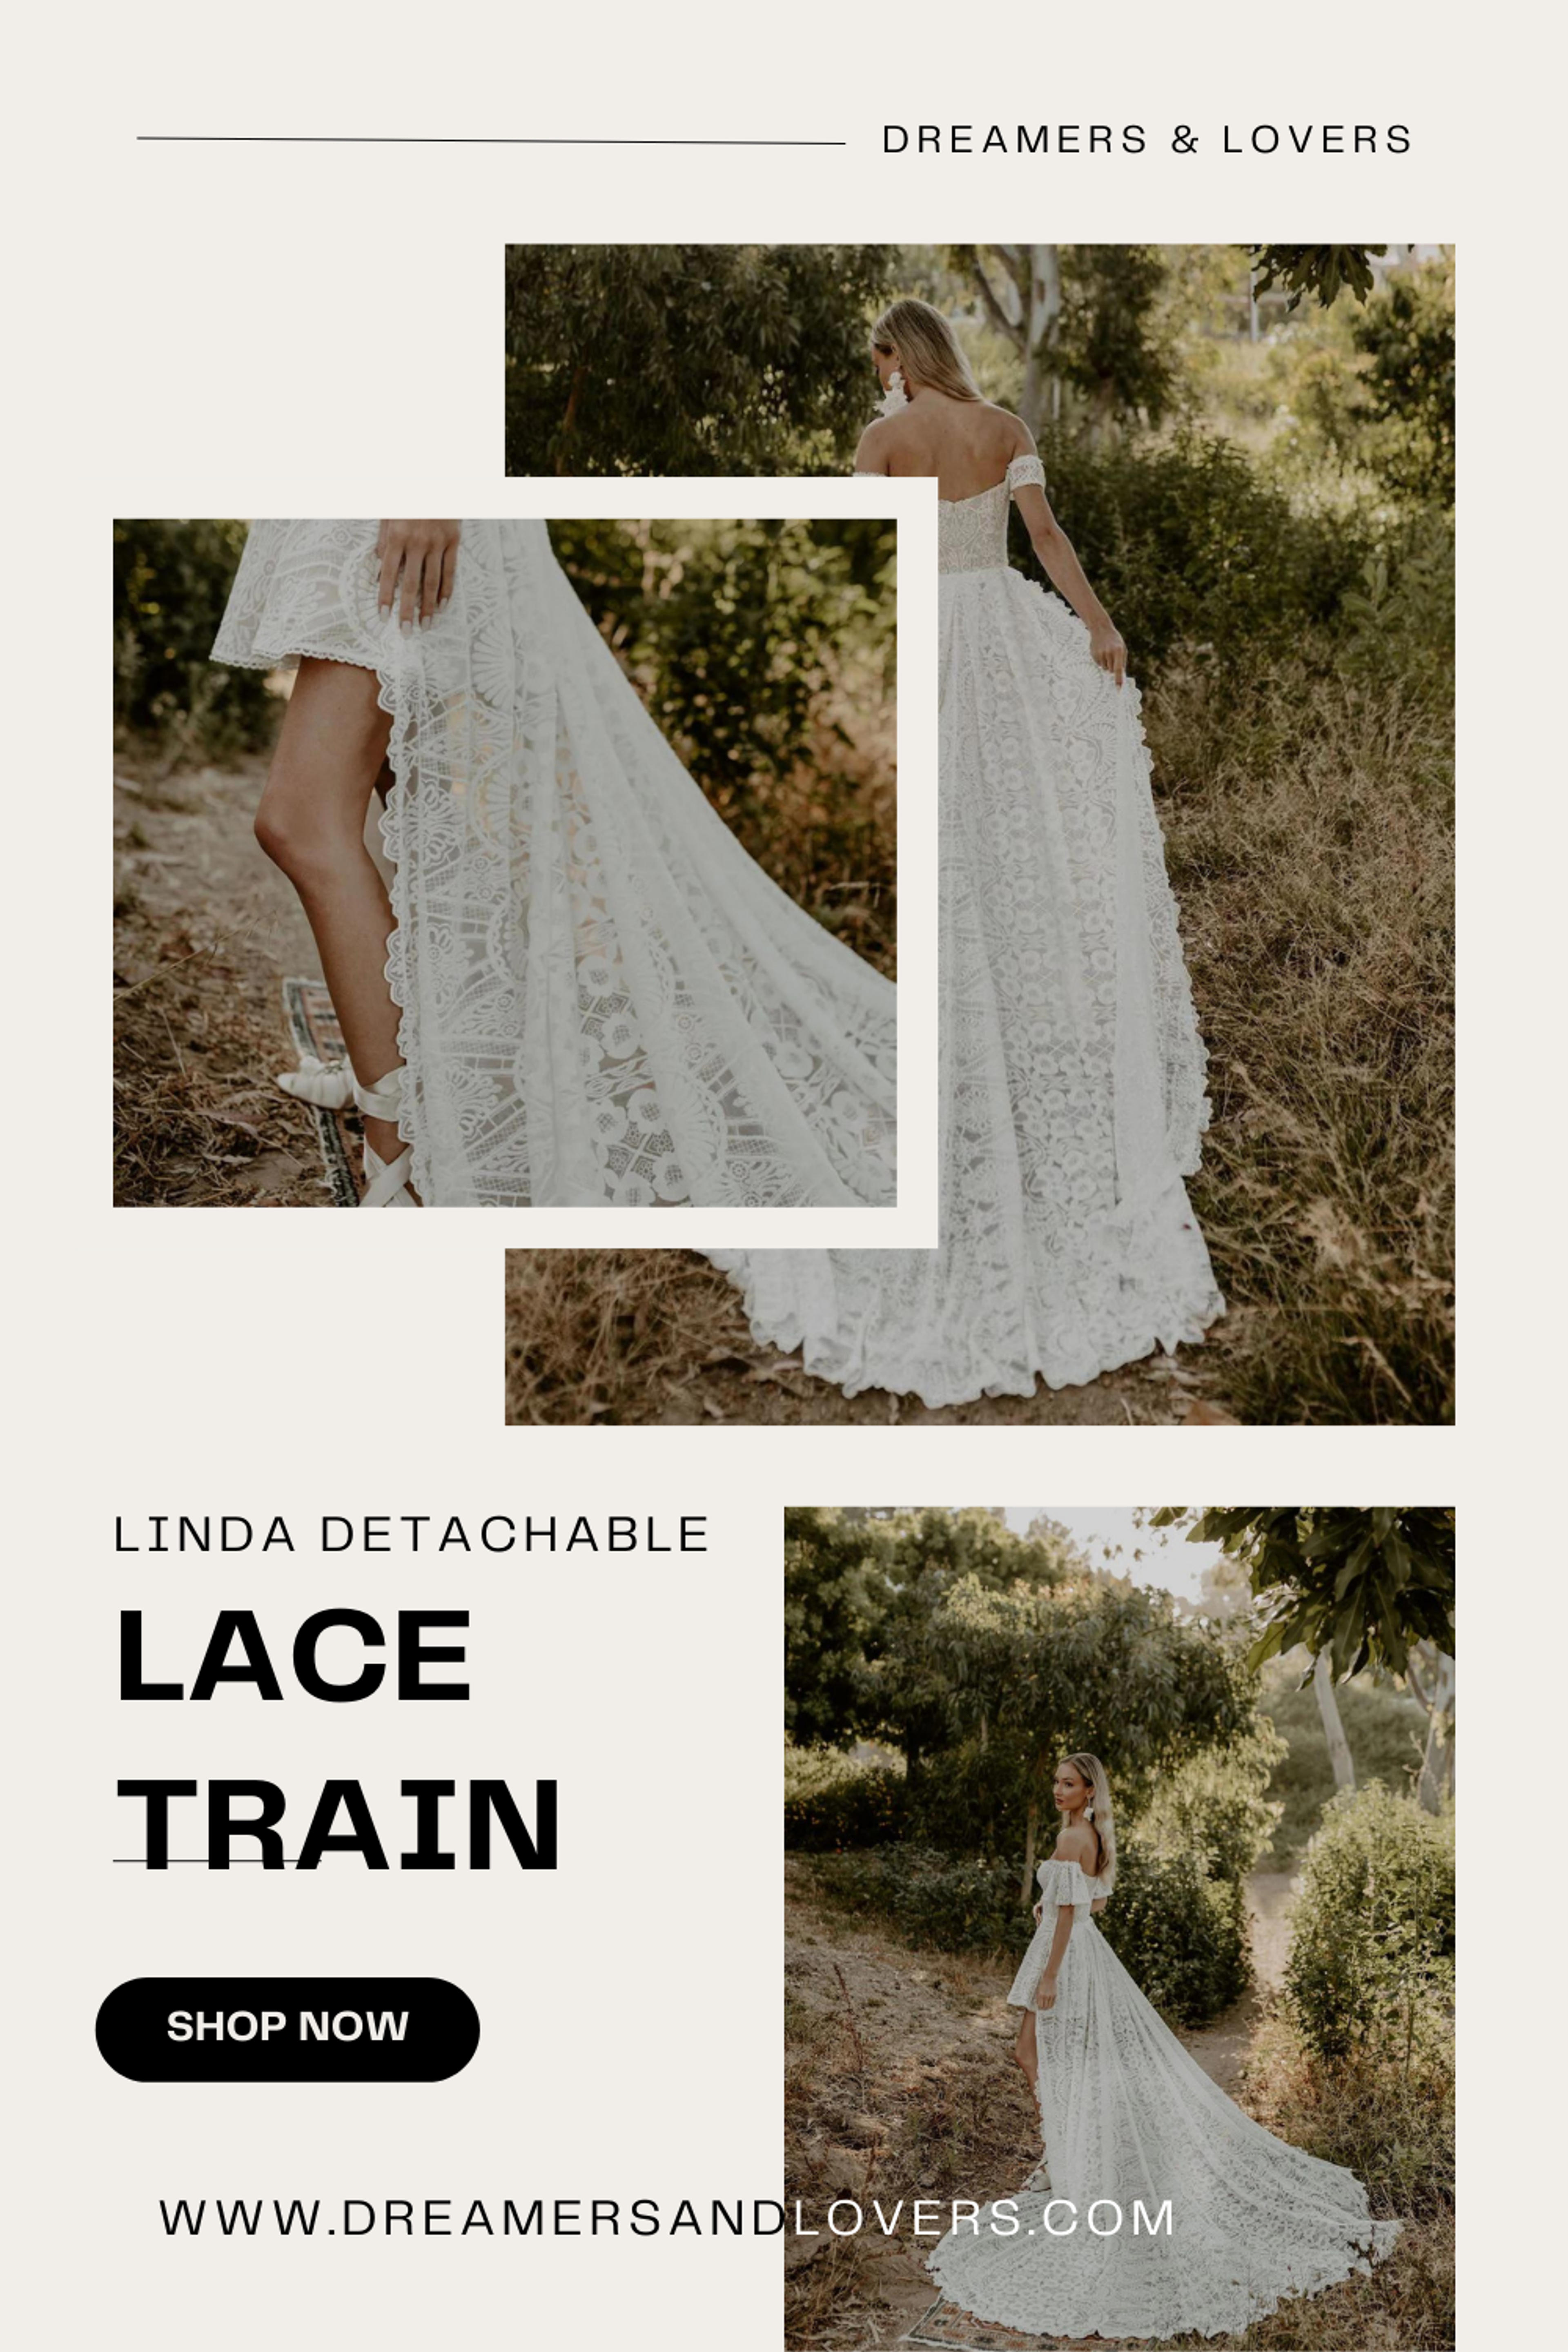 Linda Detachable Lace Train | Dreamers and Lovers